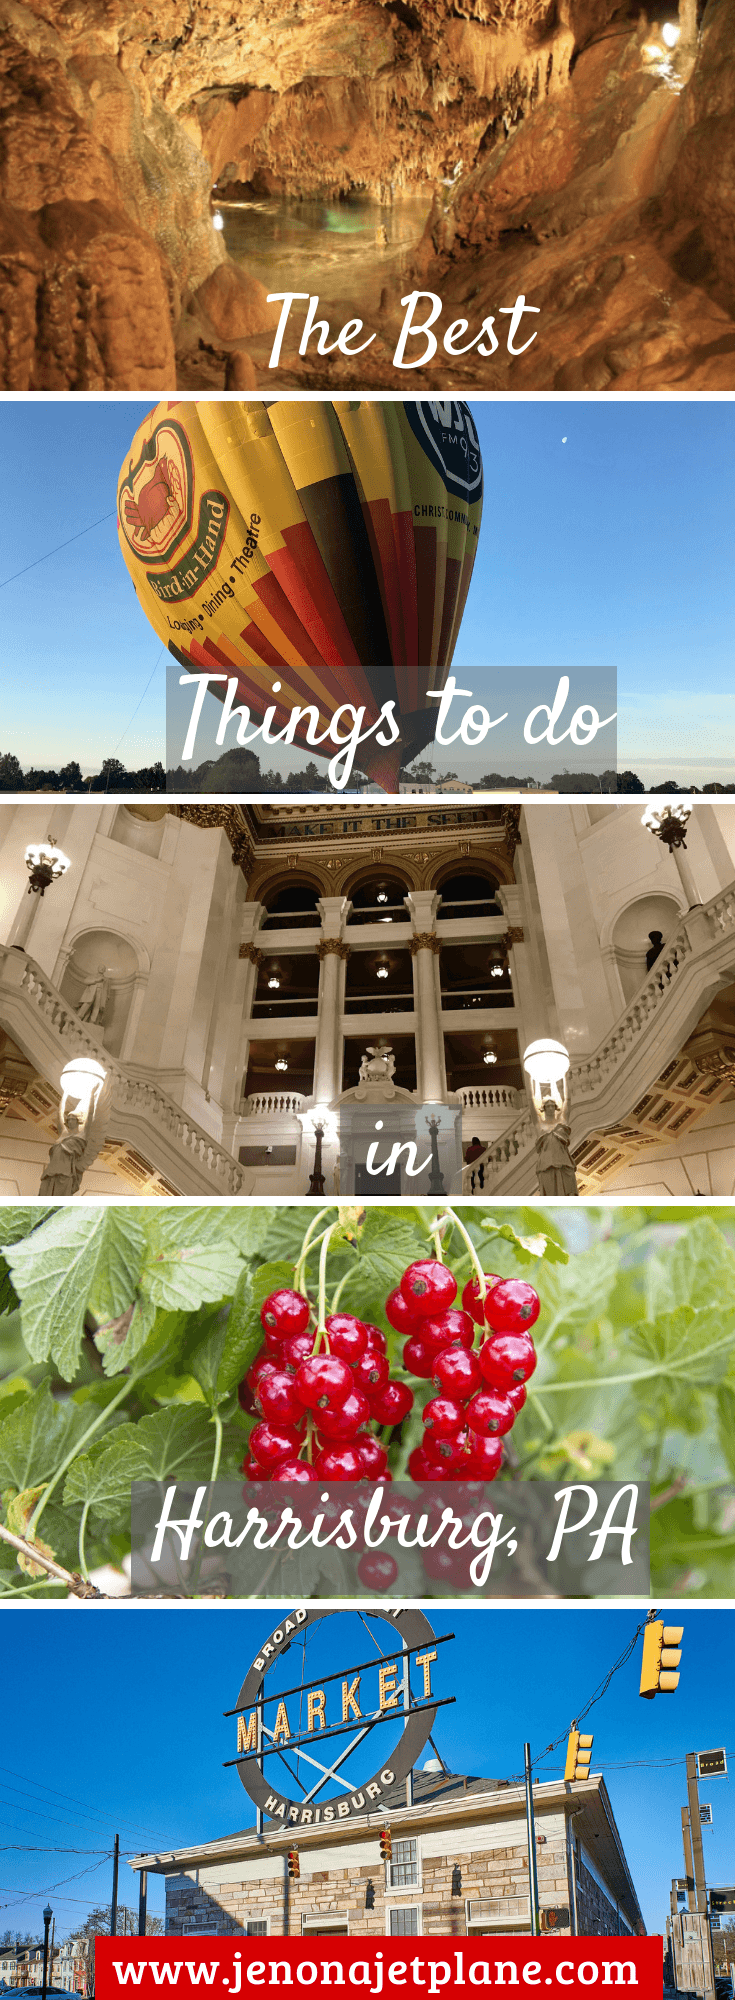 Want to know the best things to do in Harrisburg, PA? From chocolate to caverns, here are 12 activities you can't miss! Save to your travel board for inspiration. #harrisburgpa #pennsylvaniatravel